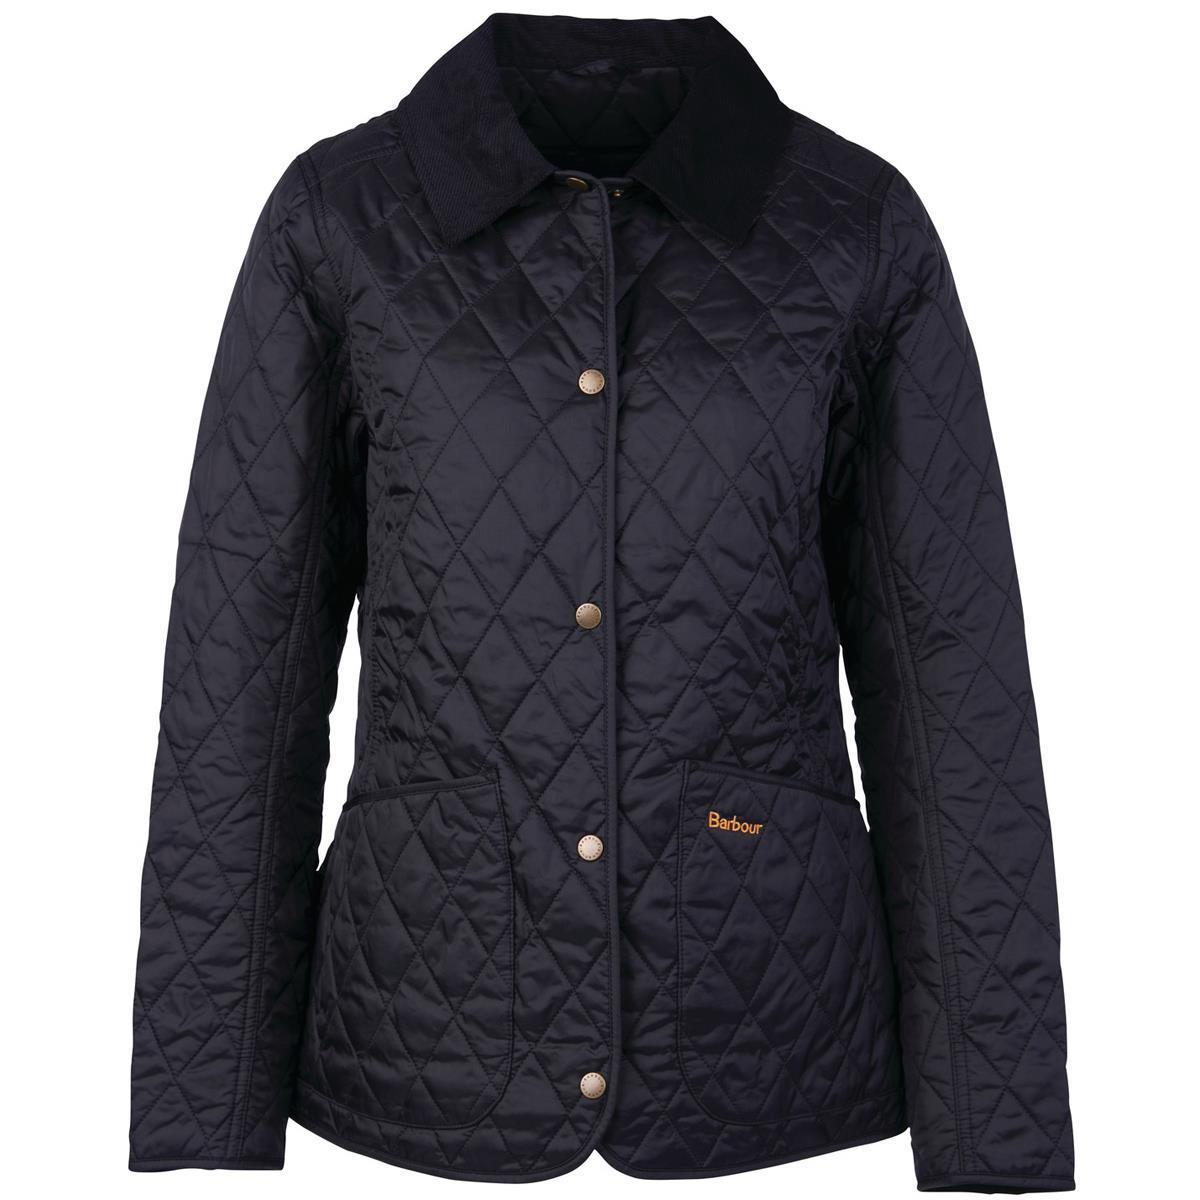 What are the characteristics of the Barbour Annandale Quilted Jacket?